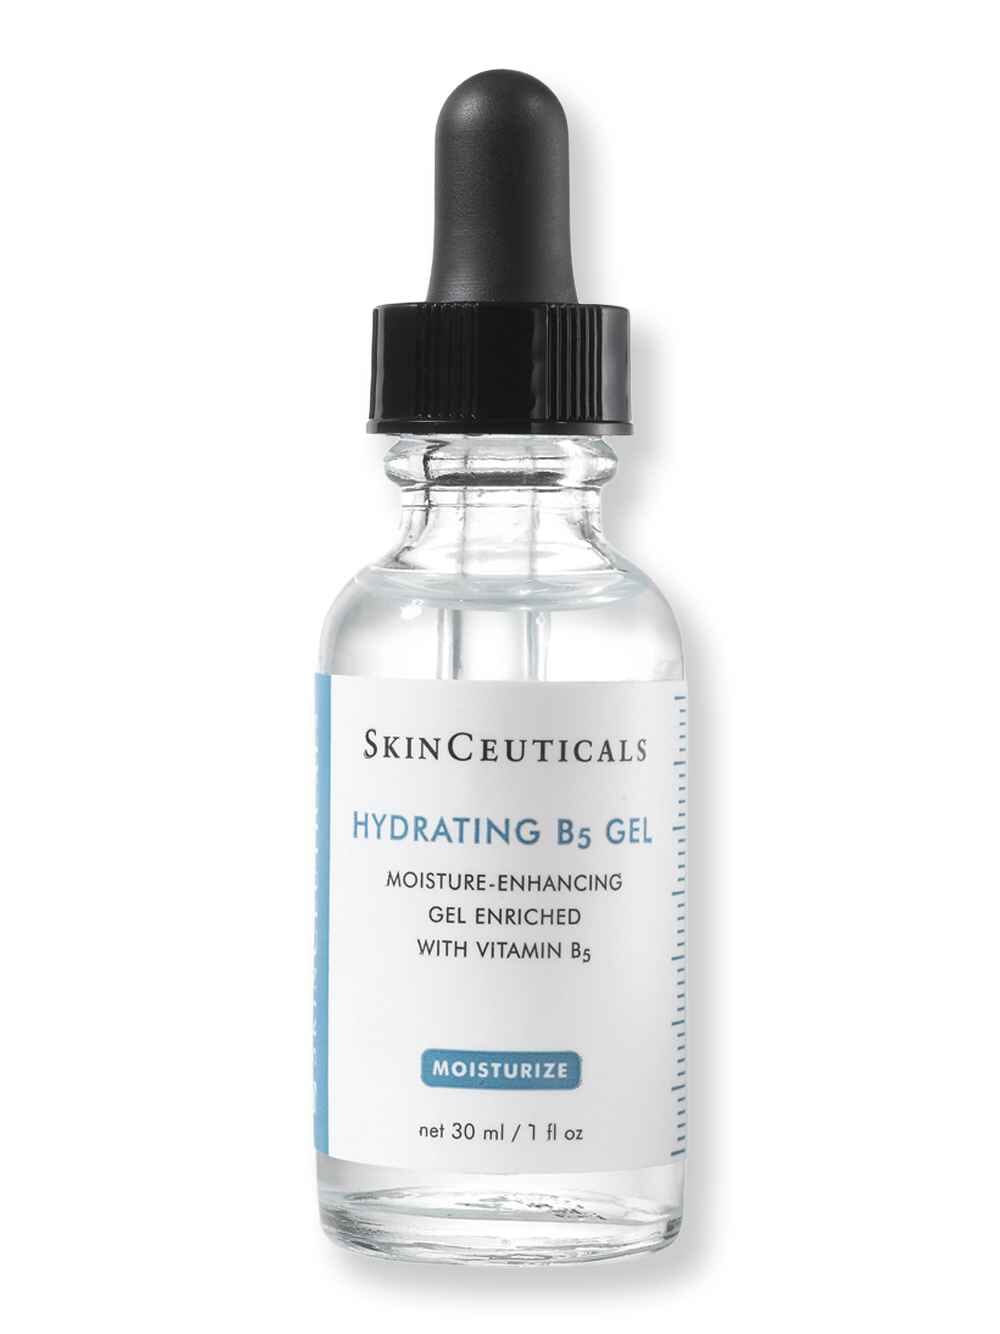 SkinCeuticals SkinCeuticals Hydrating B5 Gel 30 ml Face Moisturizers 